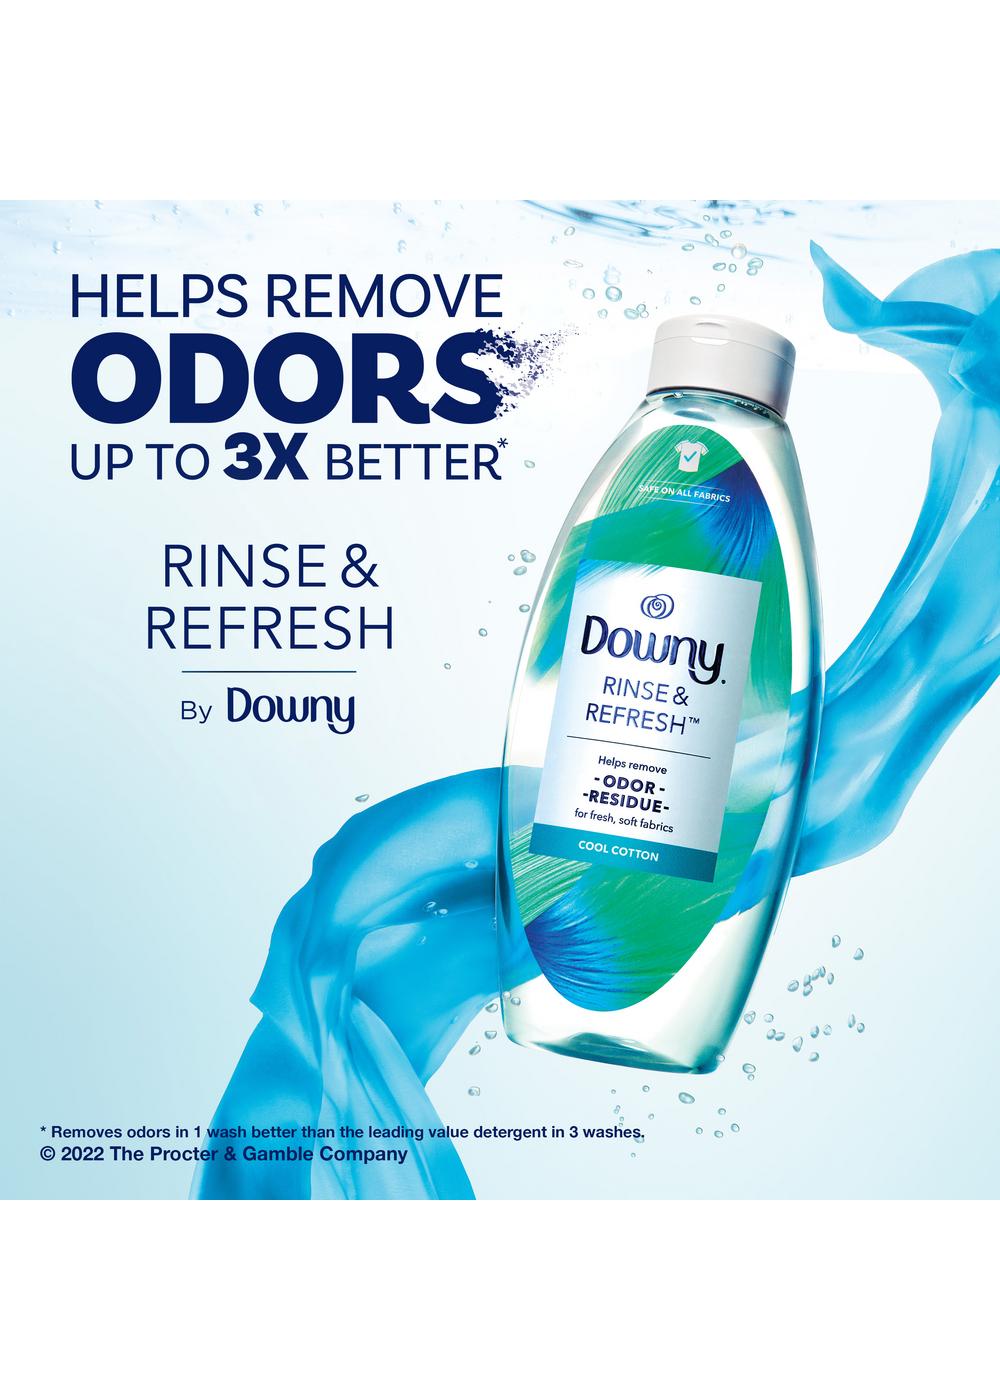 Downy Rinse & Refresh Laundry Odor Remover - Cool Cotton; image 5 of 10